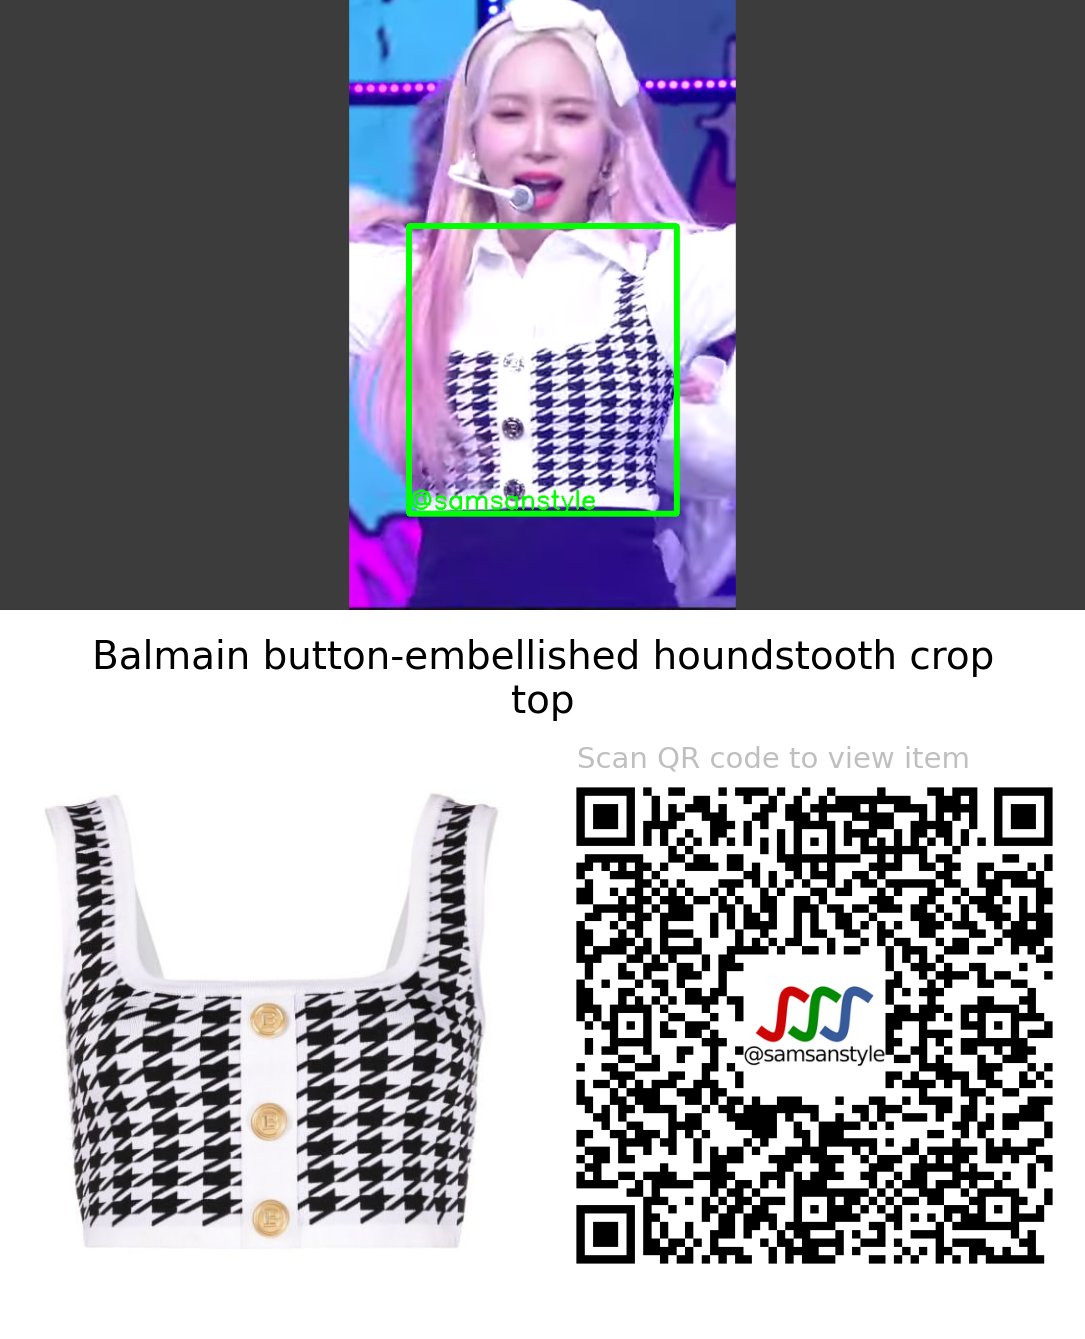 WJSN Chocome Dayoung | Super Yuppers! KBS Music Bank | Balmain button-embellished houndstooth crop top